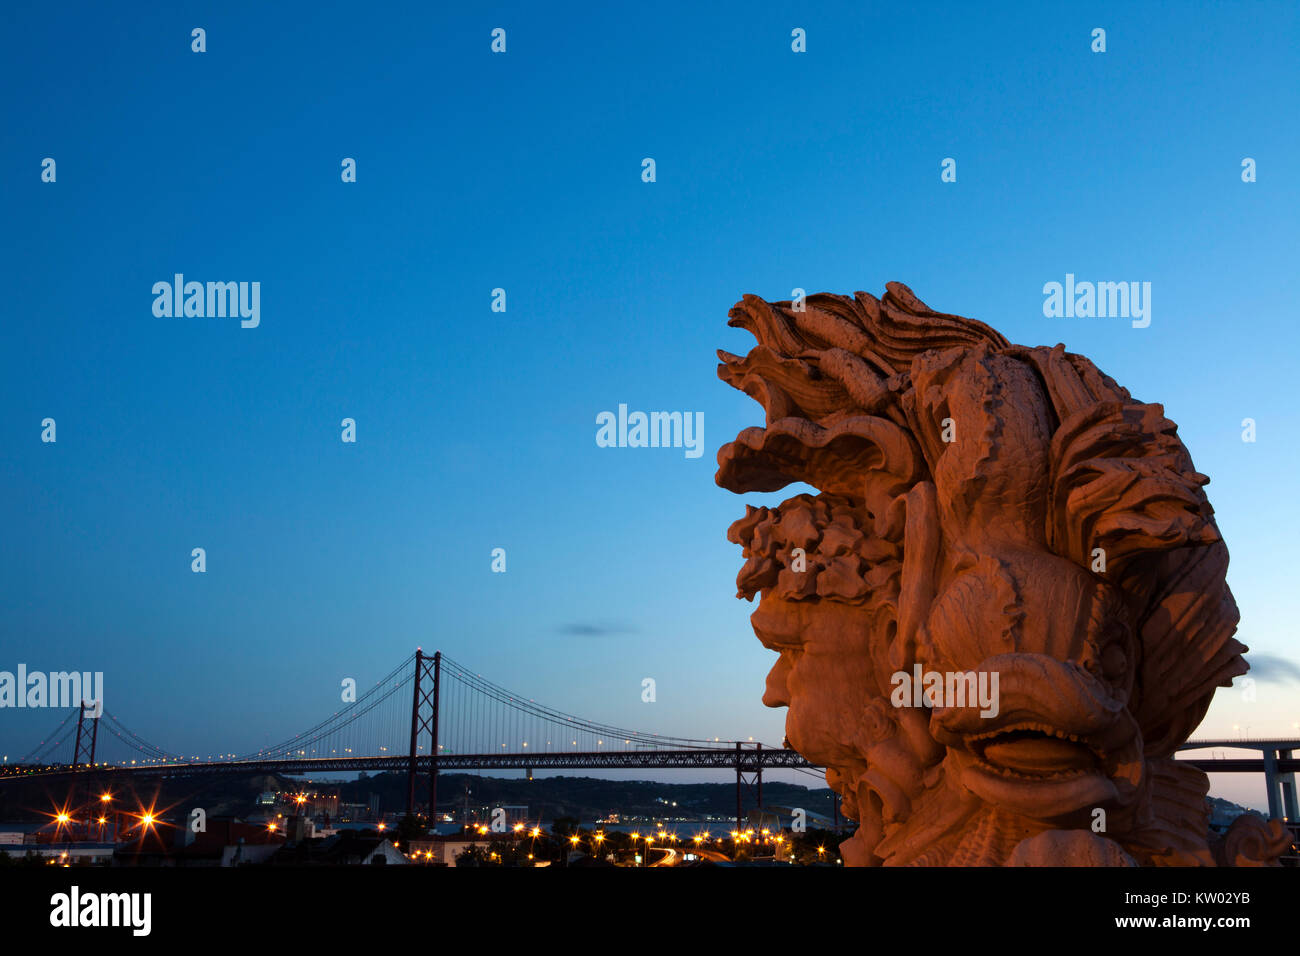 View of the 25 April Bridge (Ponte 25 de Abril) in Lisbon, Portugal. A sculpture stands in the foregrounds at the Miradouro do Largo das Necessidades. Stock Photo